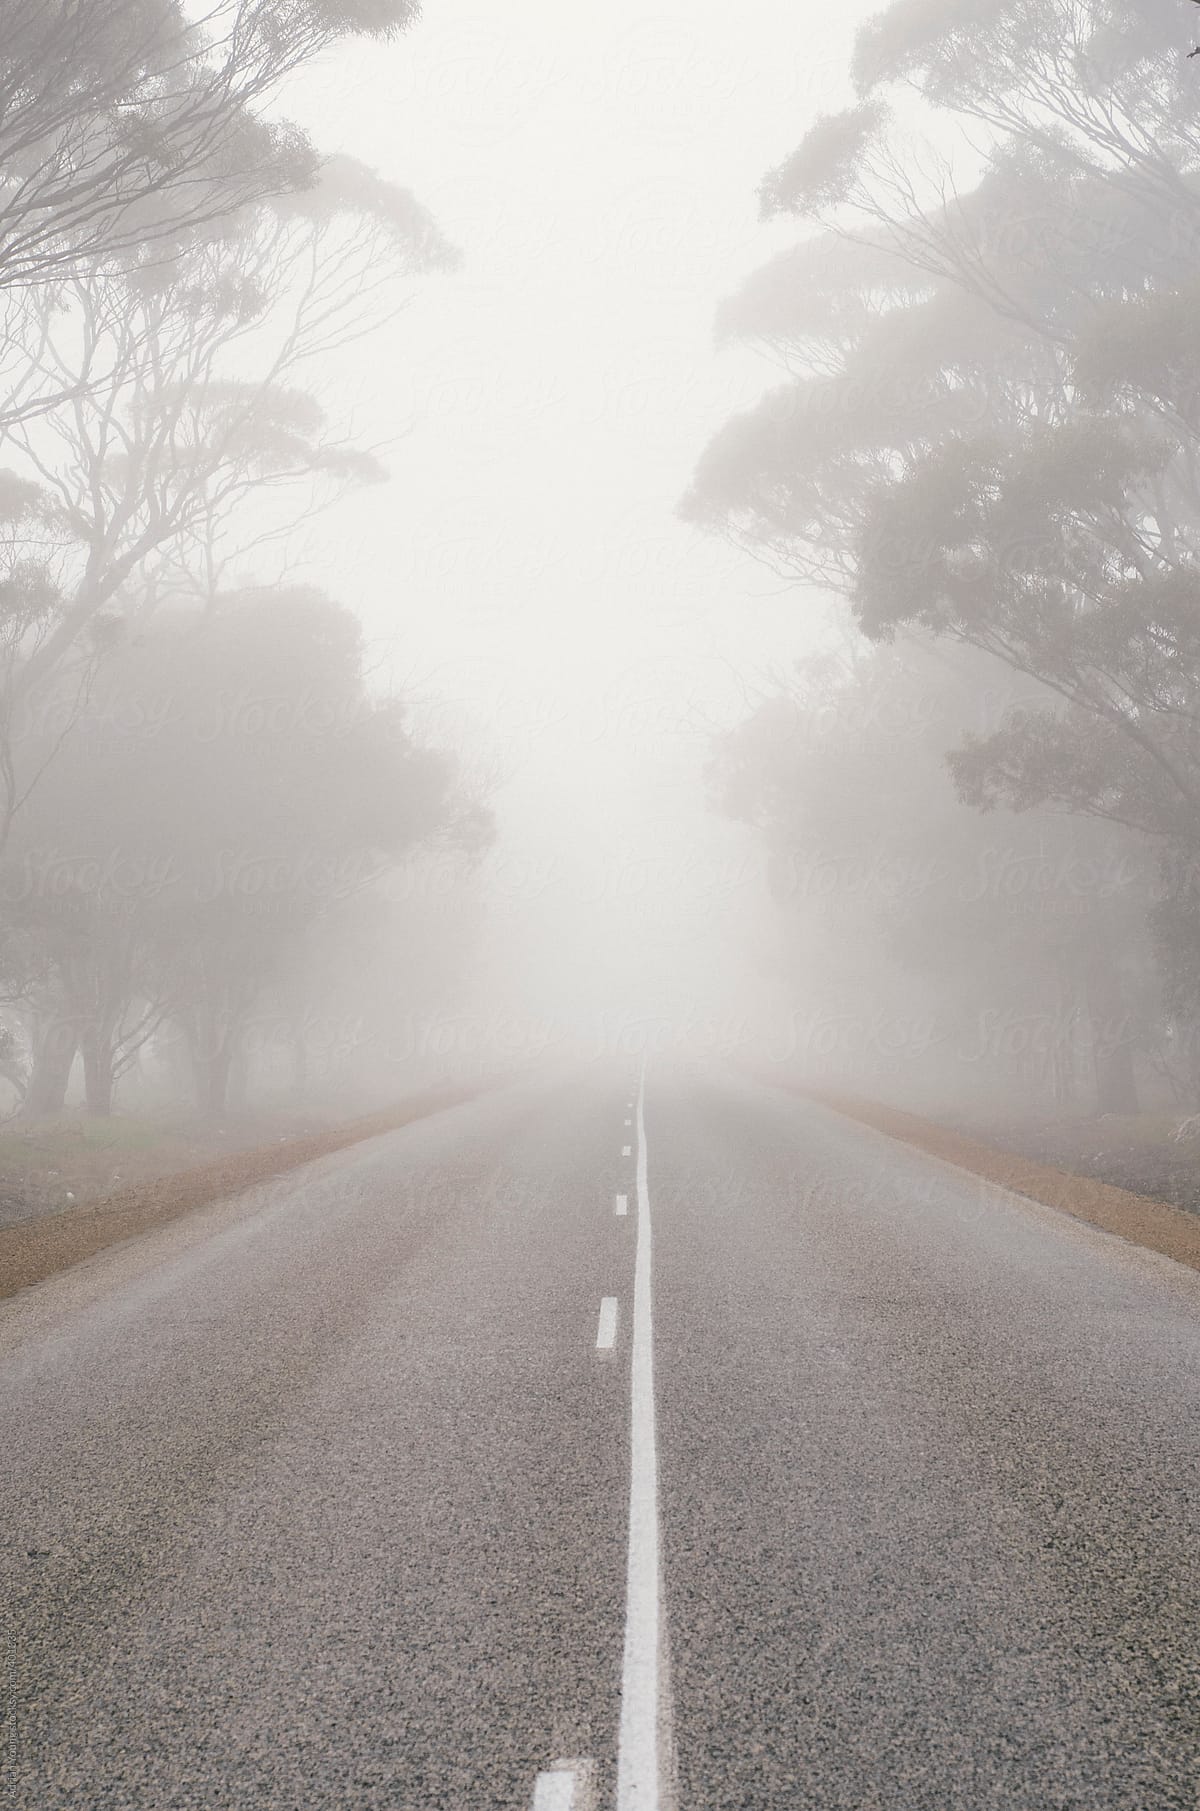 Road Into A Heavy Fog